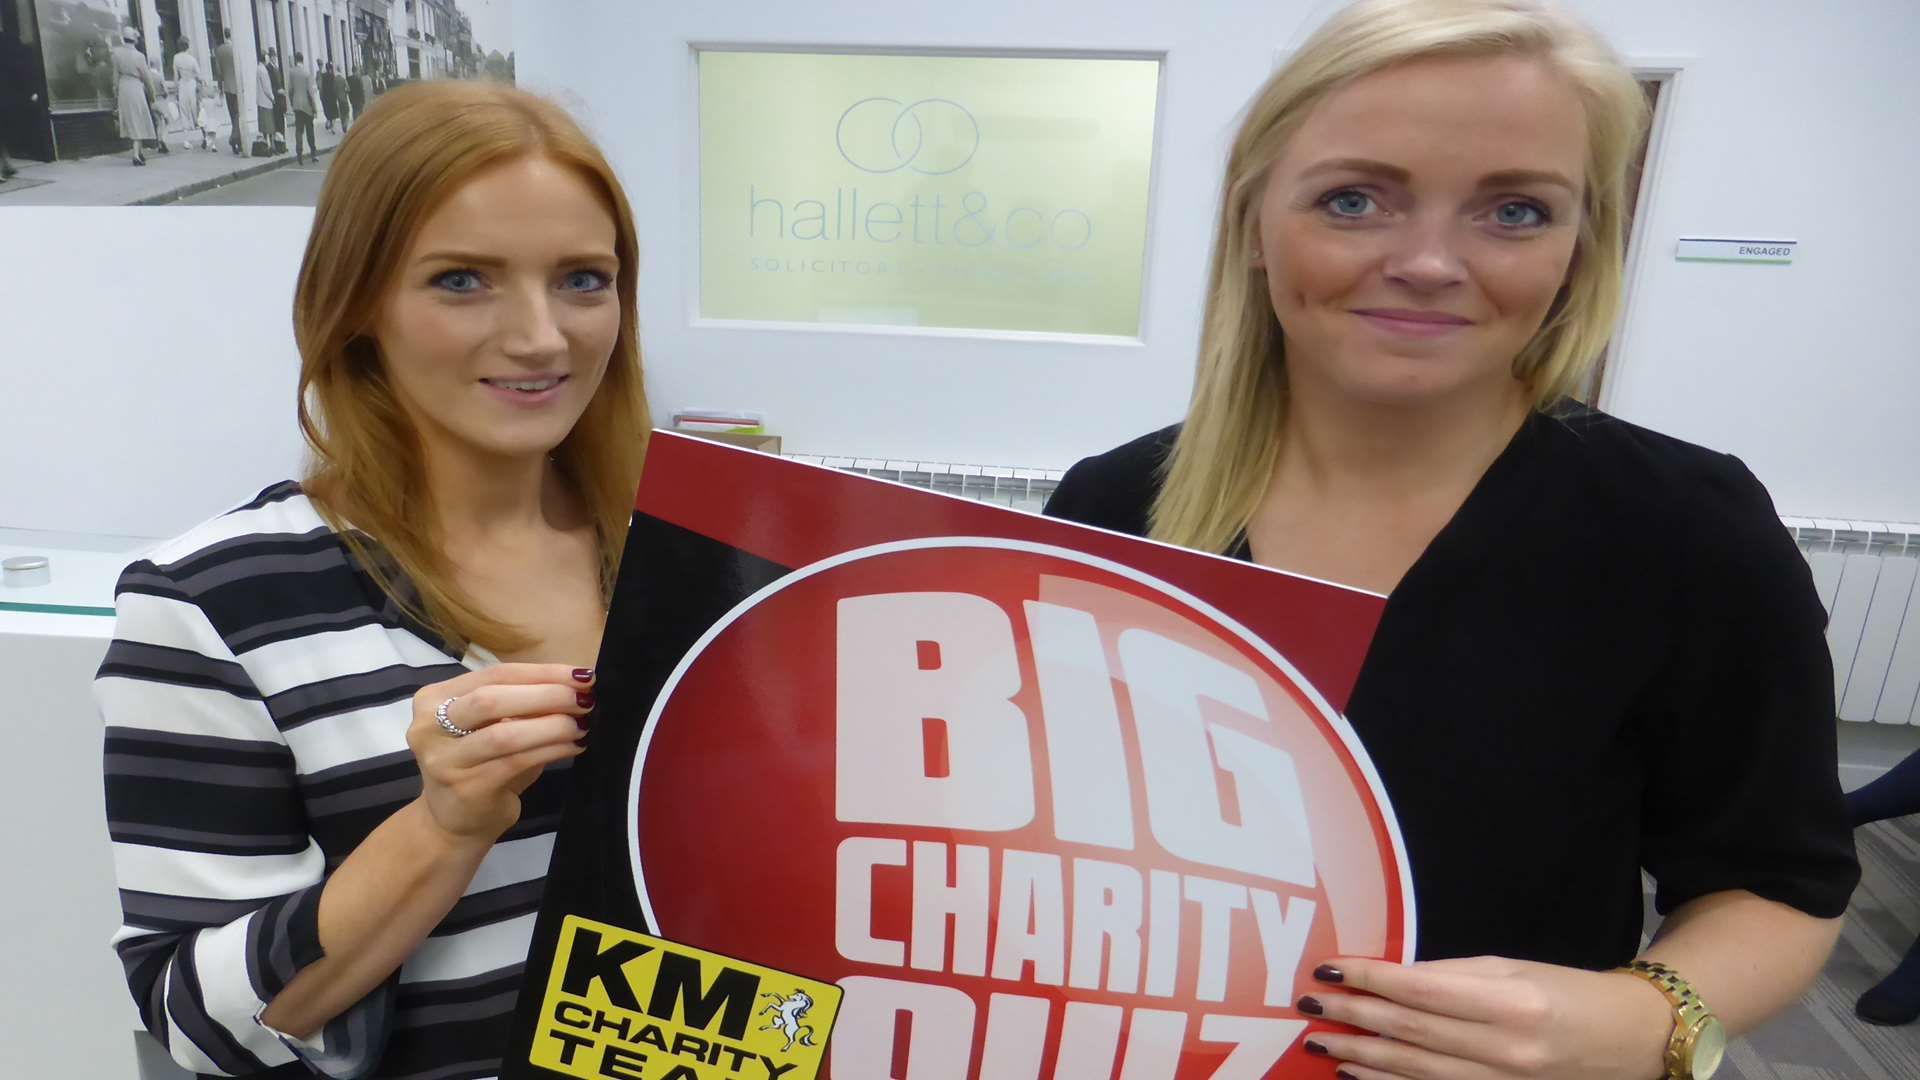 Charlotte McPeake and Abi Howland from Hallett and Co will be in a team taking part in the South Kent heat of the KM Big Charity Quiz on Friday, 18 November.